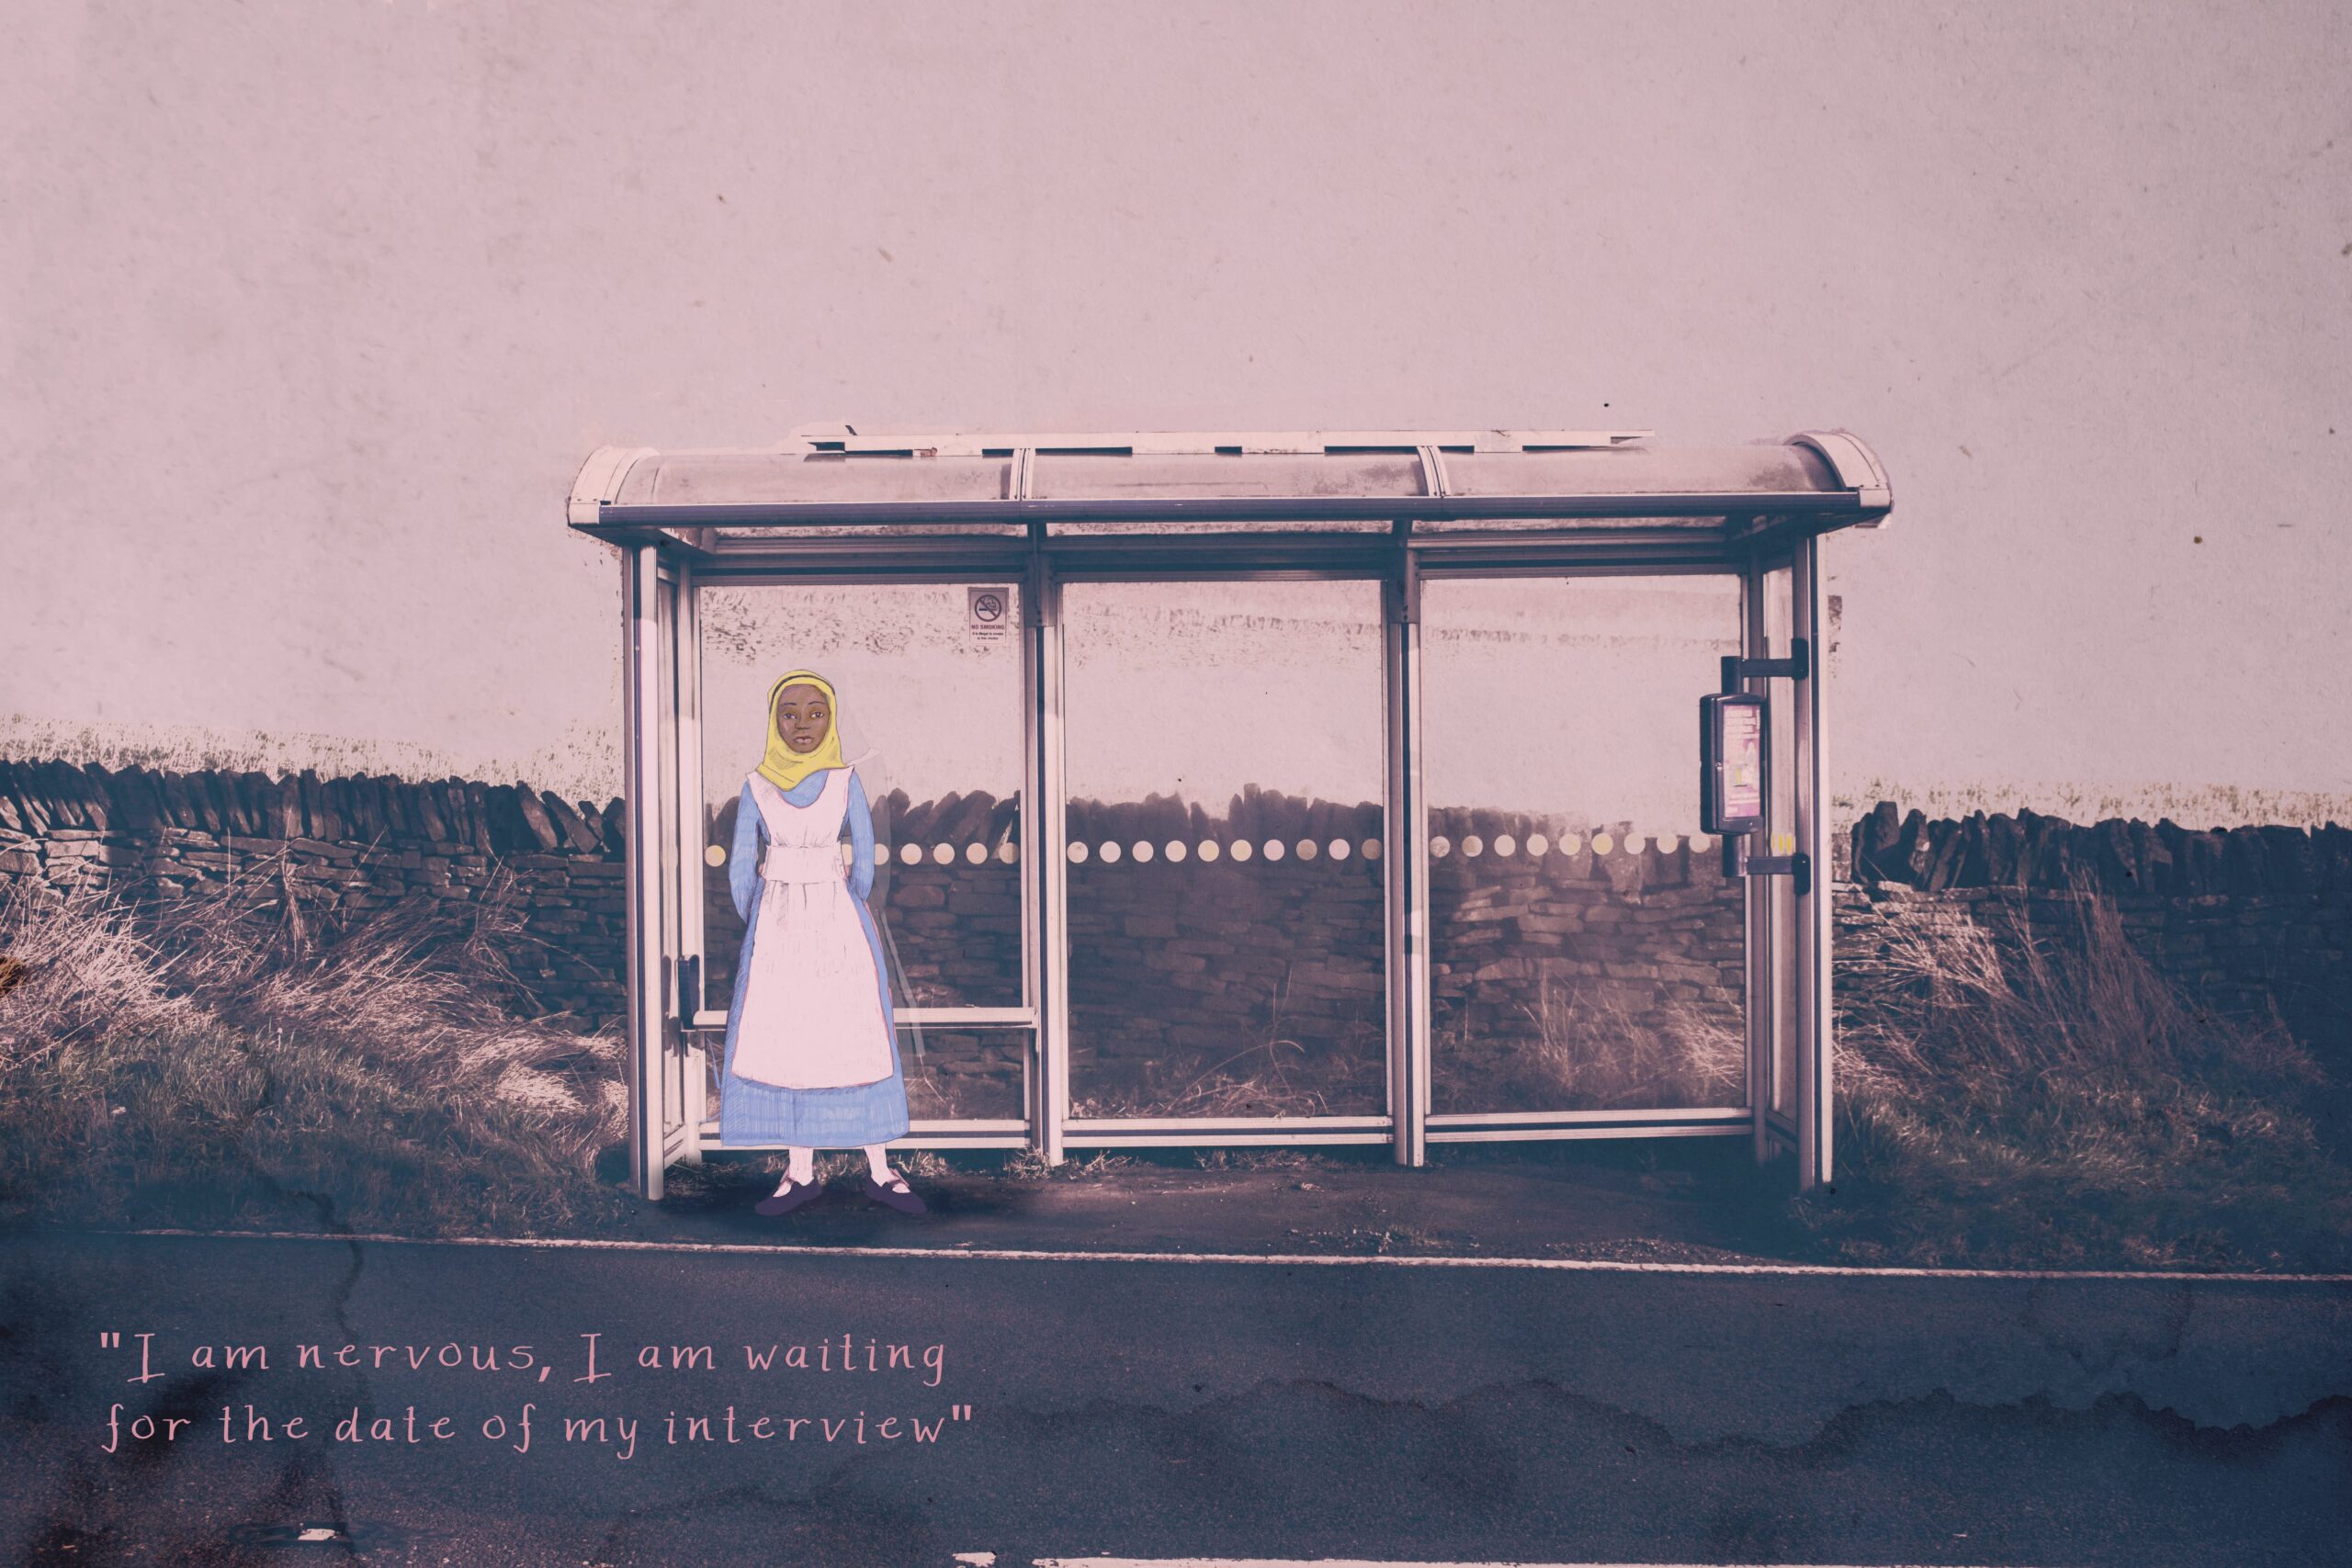 The figure of Alice stands at a bus stop. The caption reads "I am nervous, I am waiting for the date of my interview"